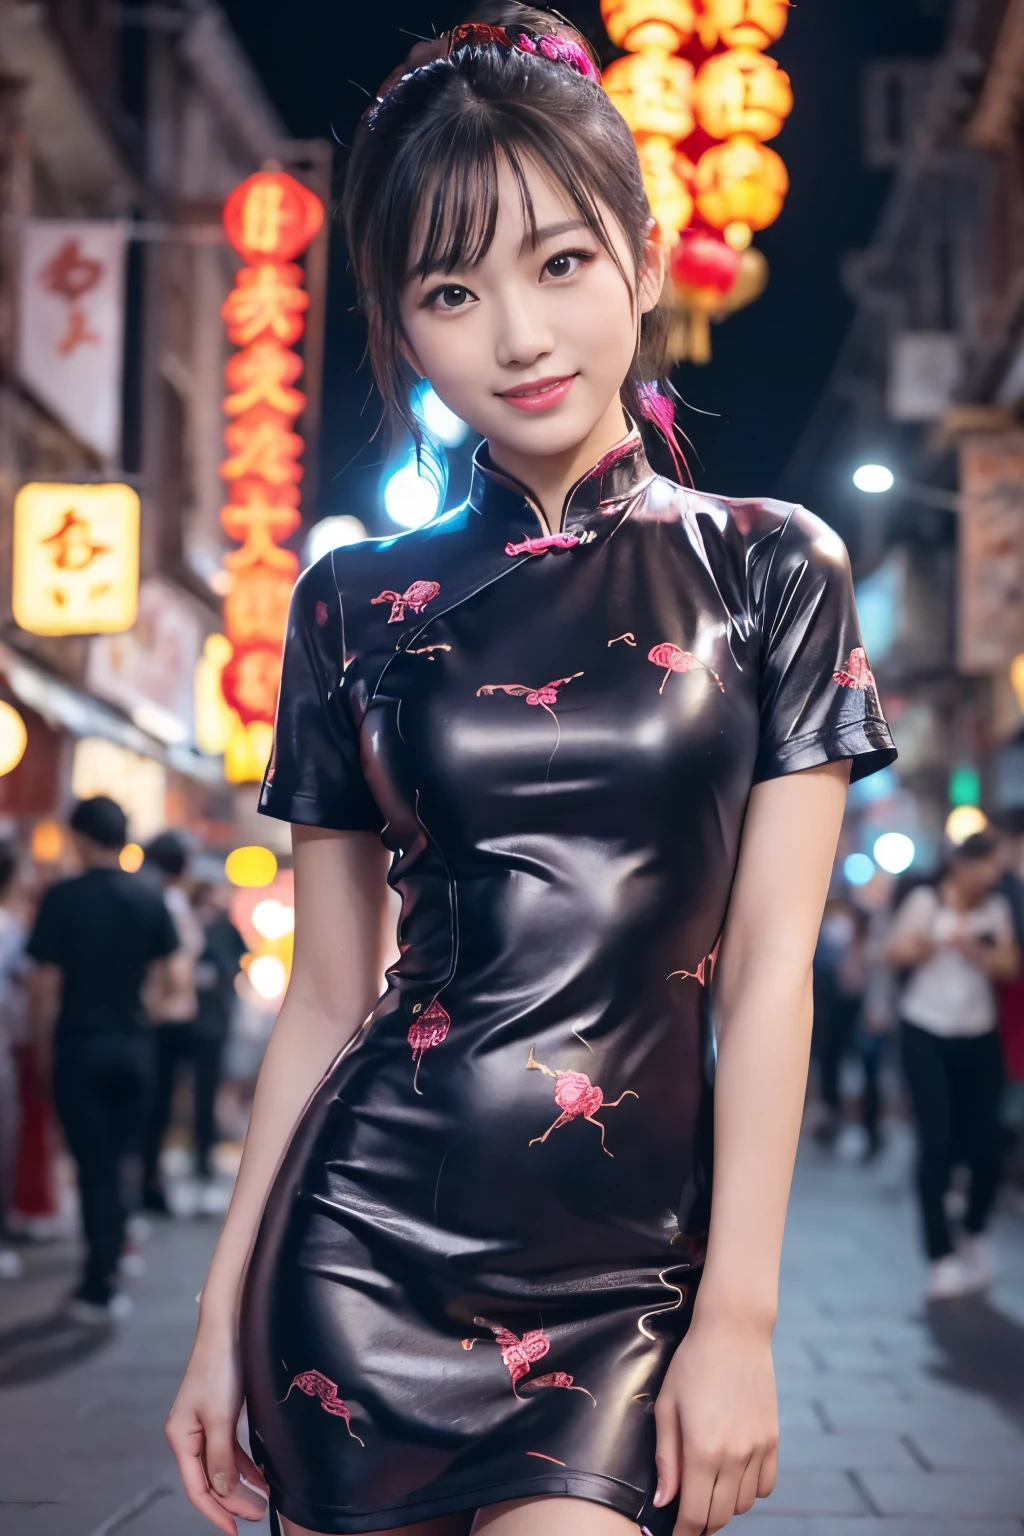 kung fu idol, lip gloss, gentle smile, whole body, good style, view audience, Scorpion print tight mini Chinese dress, high quality, realistic, very detailed, 8K wallpaper, Raw photo, professional photography, Bokeh, Depth of the bounds written, illumination, Chinatown at night filled with neon lights, super stylish lighting